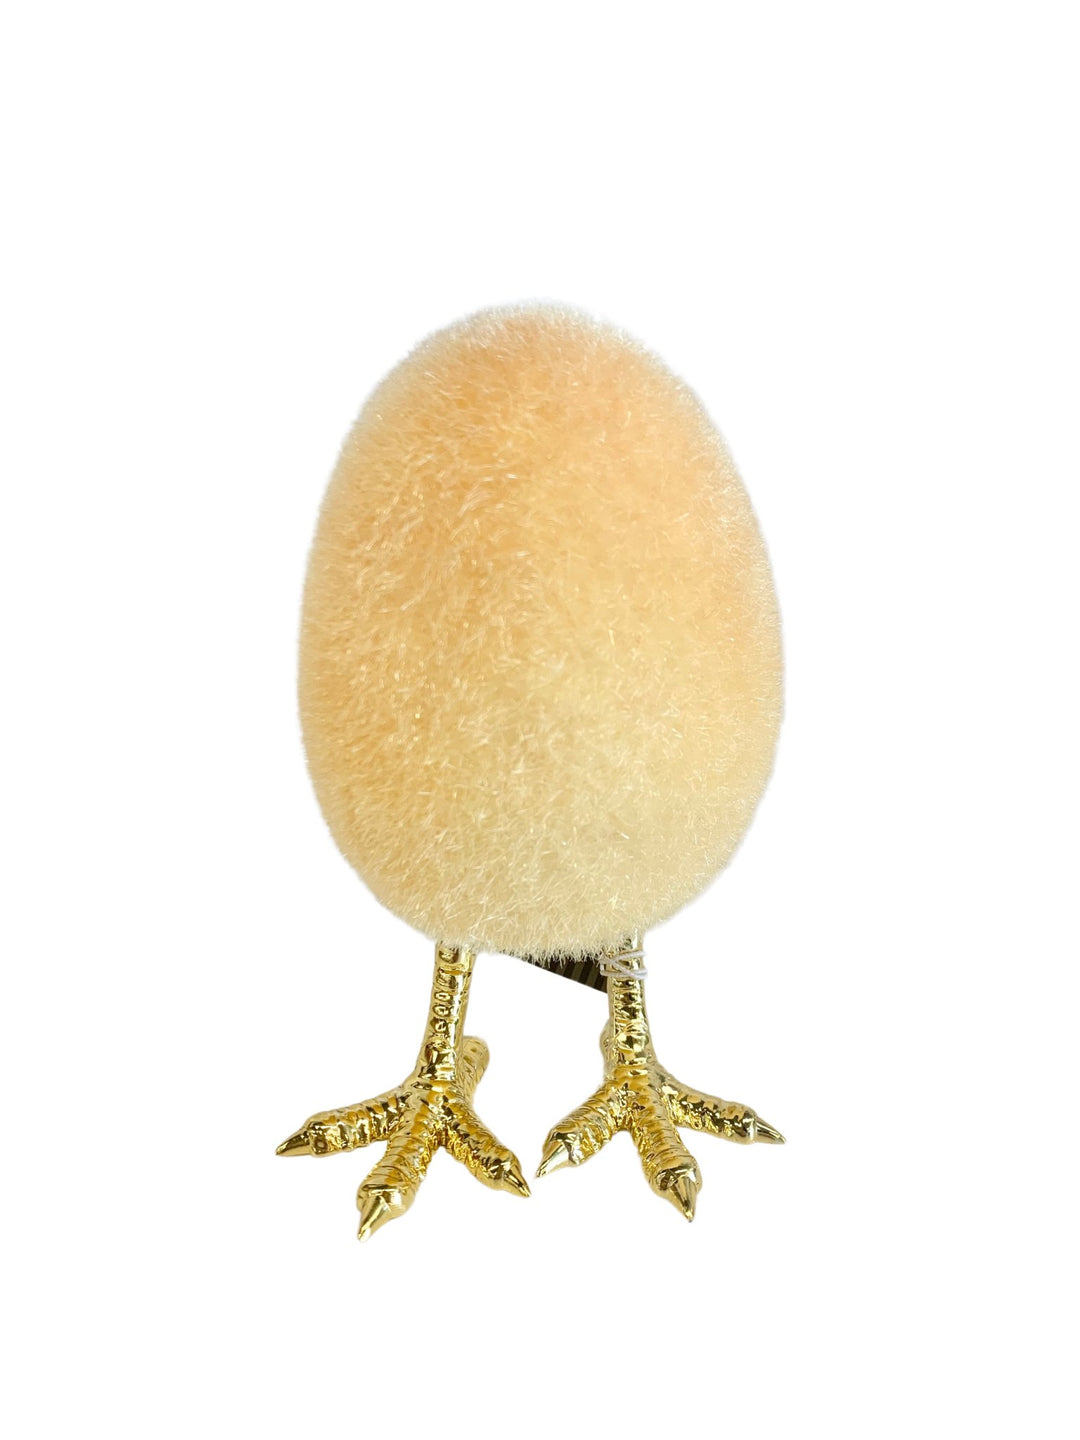 Flocked Egg With Feet - #Perch#